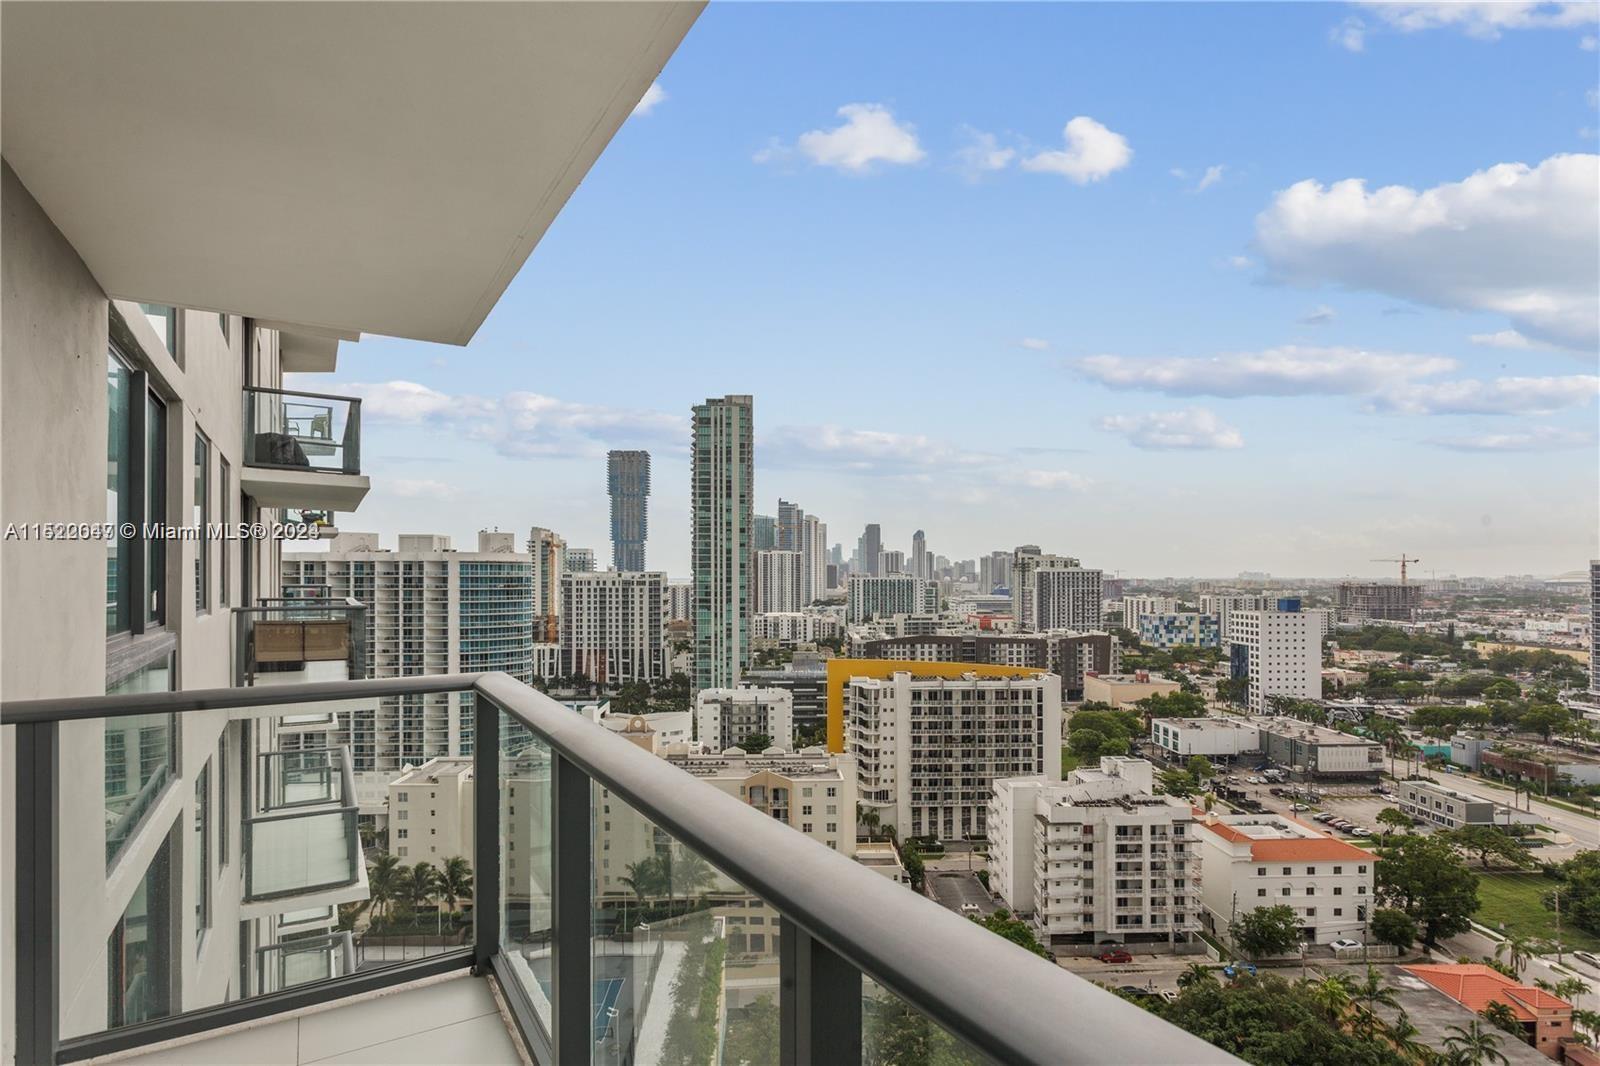 Beautiful 2 bedroom 2 bathroom with amazing views to Midtown and Wynwood. This residence features hu